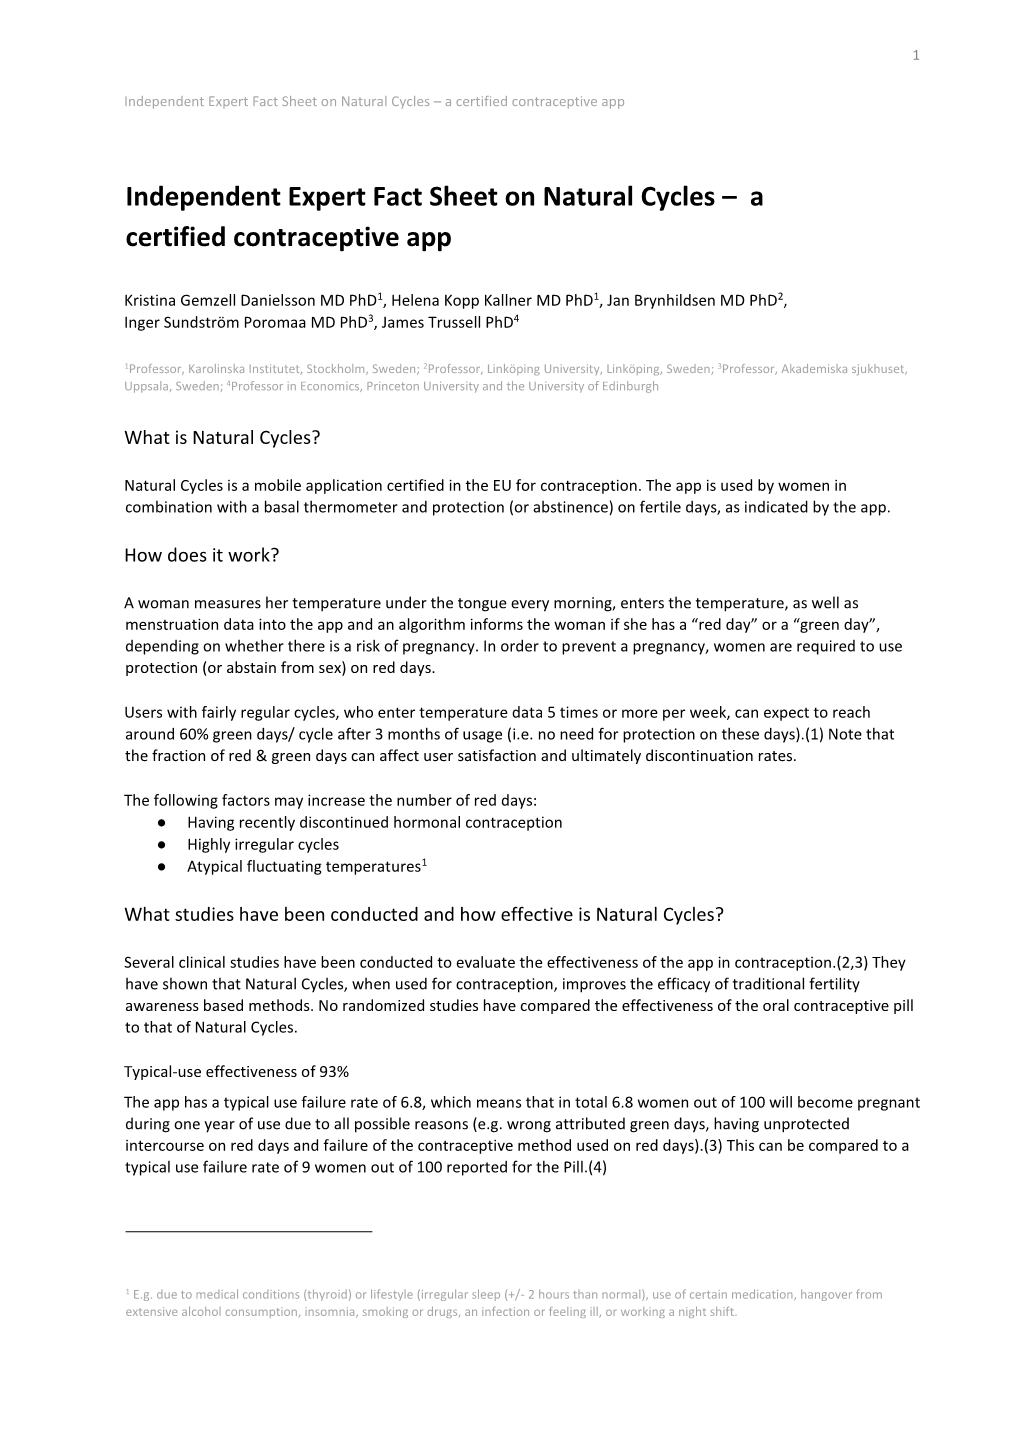 Independent Expert Fact Sheet on Natural Cycles – a Certified Contraceptive App